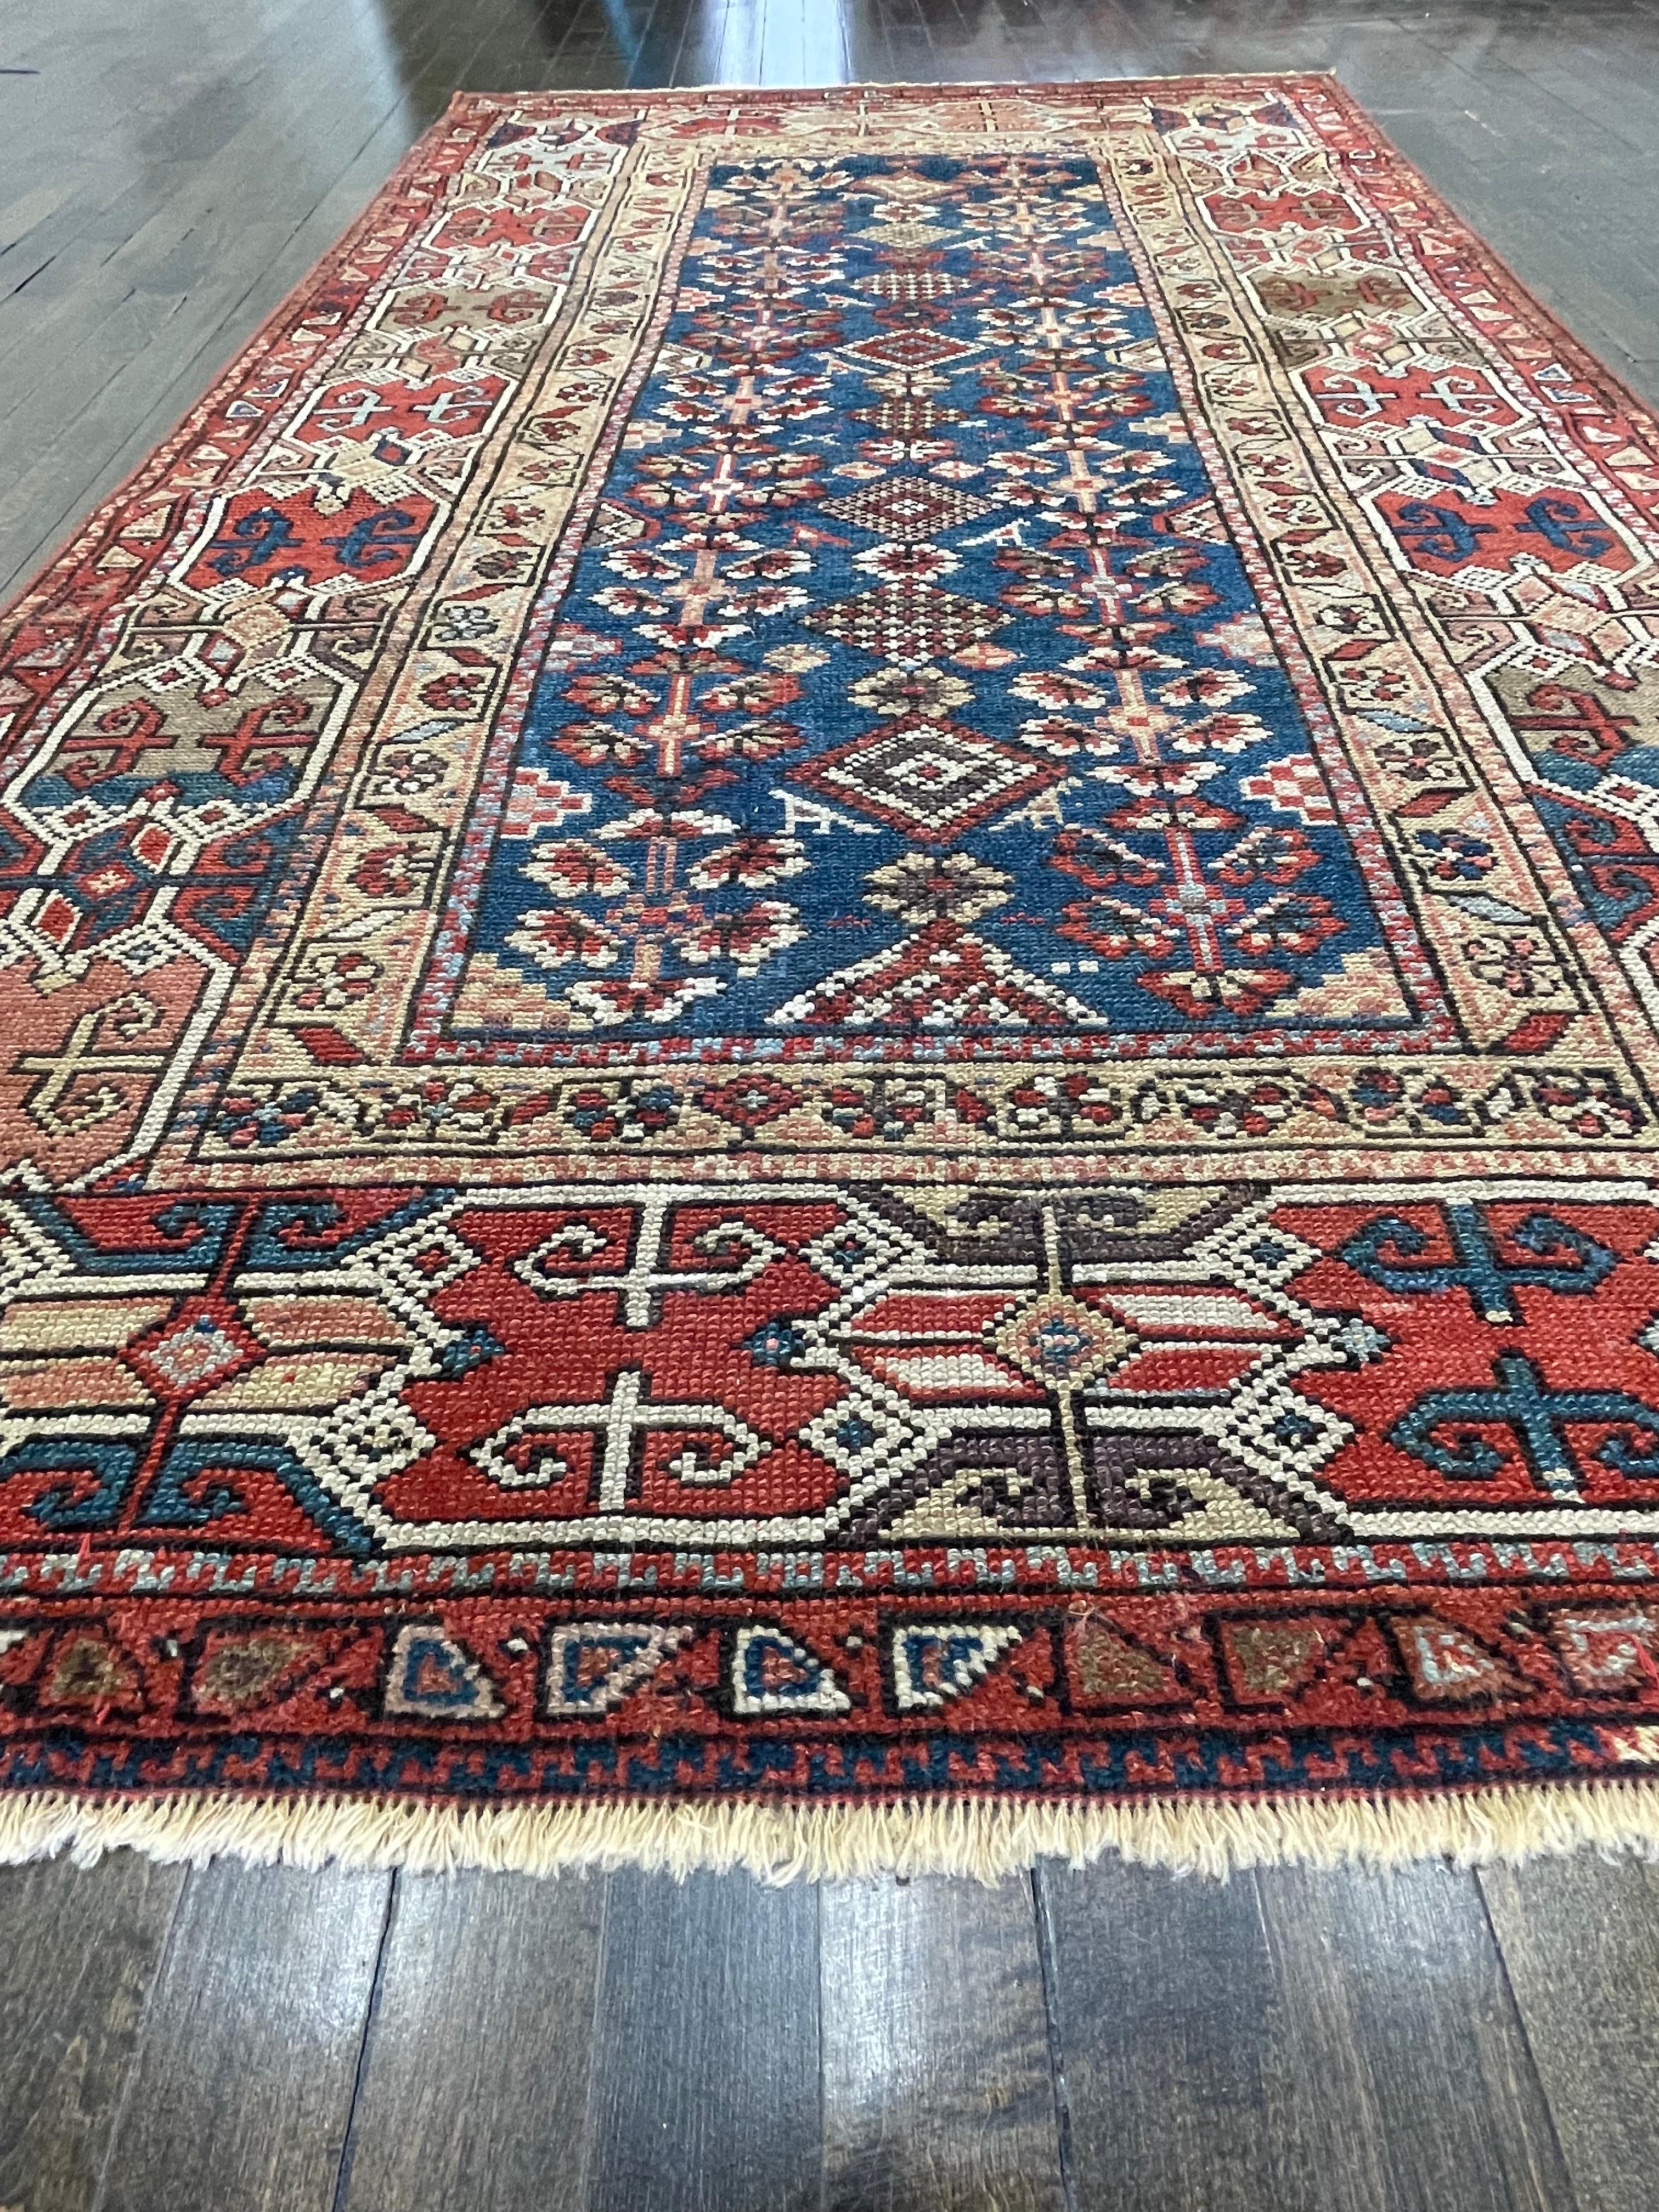 A very attractive piece with splendid color, this rug is attributed to Kazak ,perhaps woven by an individual artist weaver for personal use and not the market. It has a wool warp and weft with neutral brown tone undyed. A wide and well-drowned